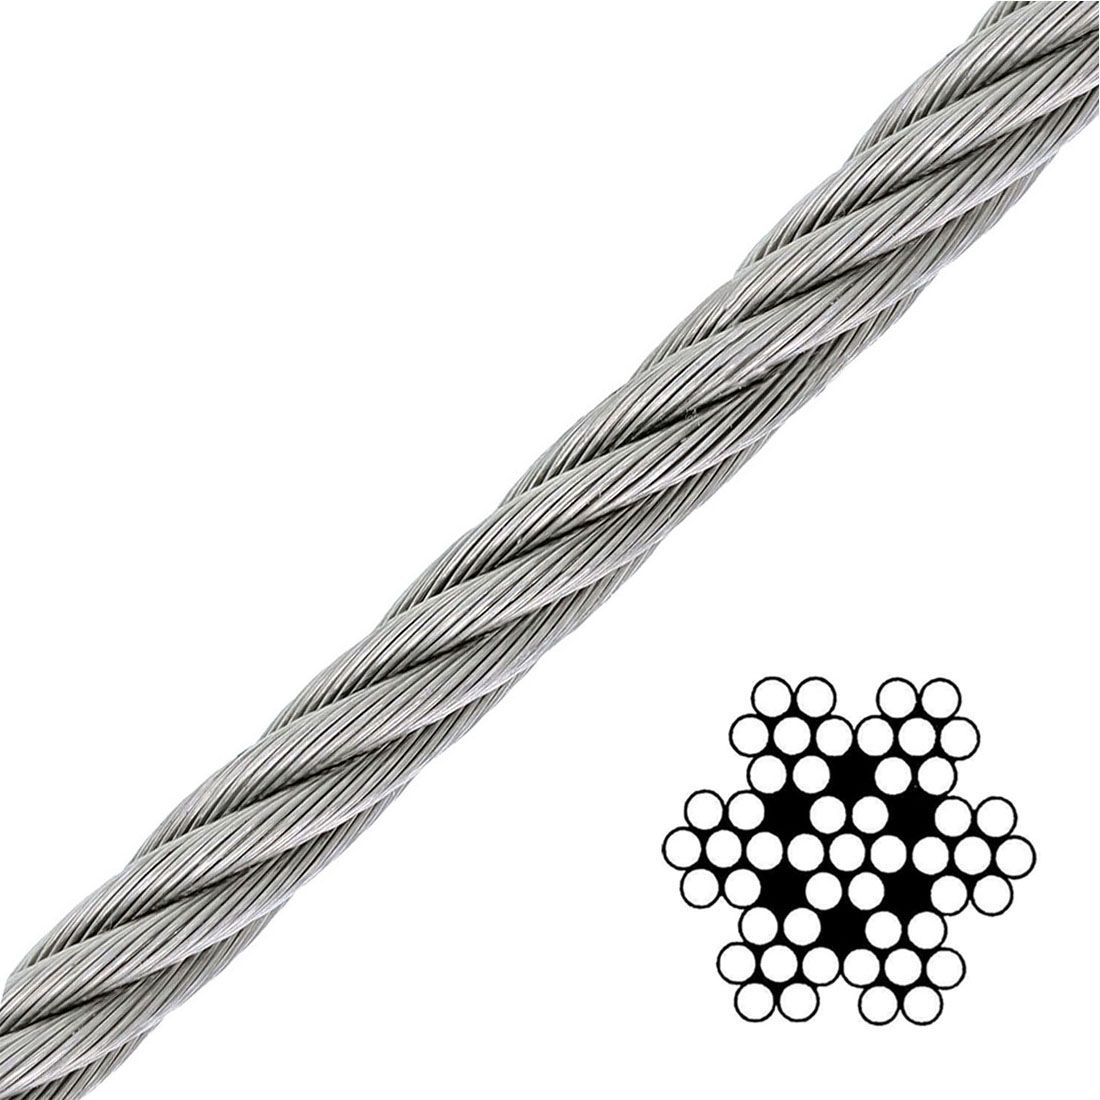 Haul Master 61784 100 ft. x 3mm Aircraft Grade Wire Rope